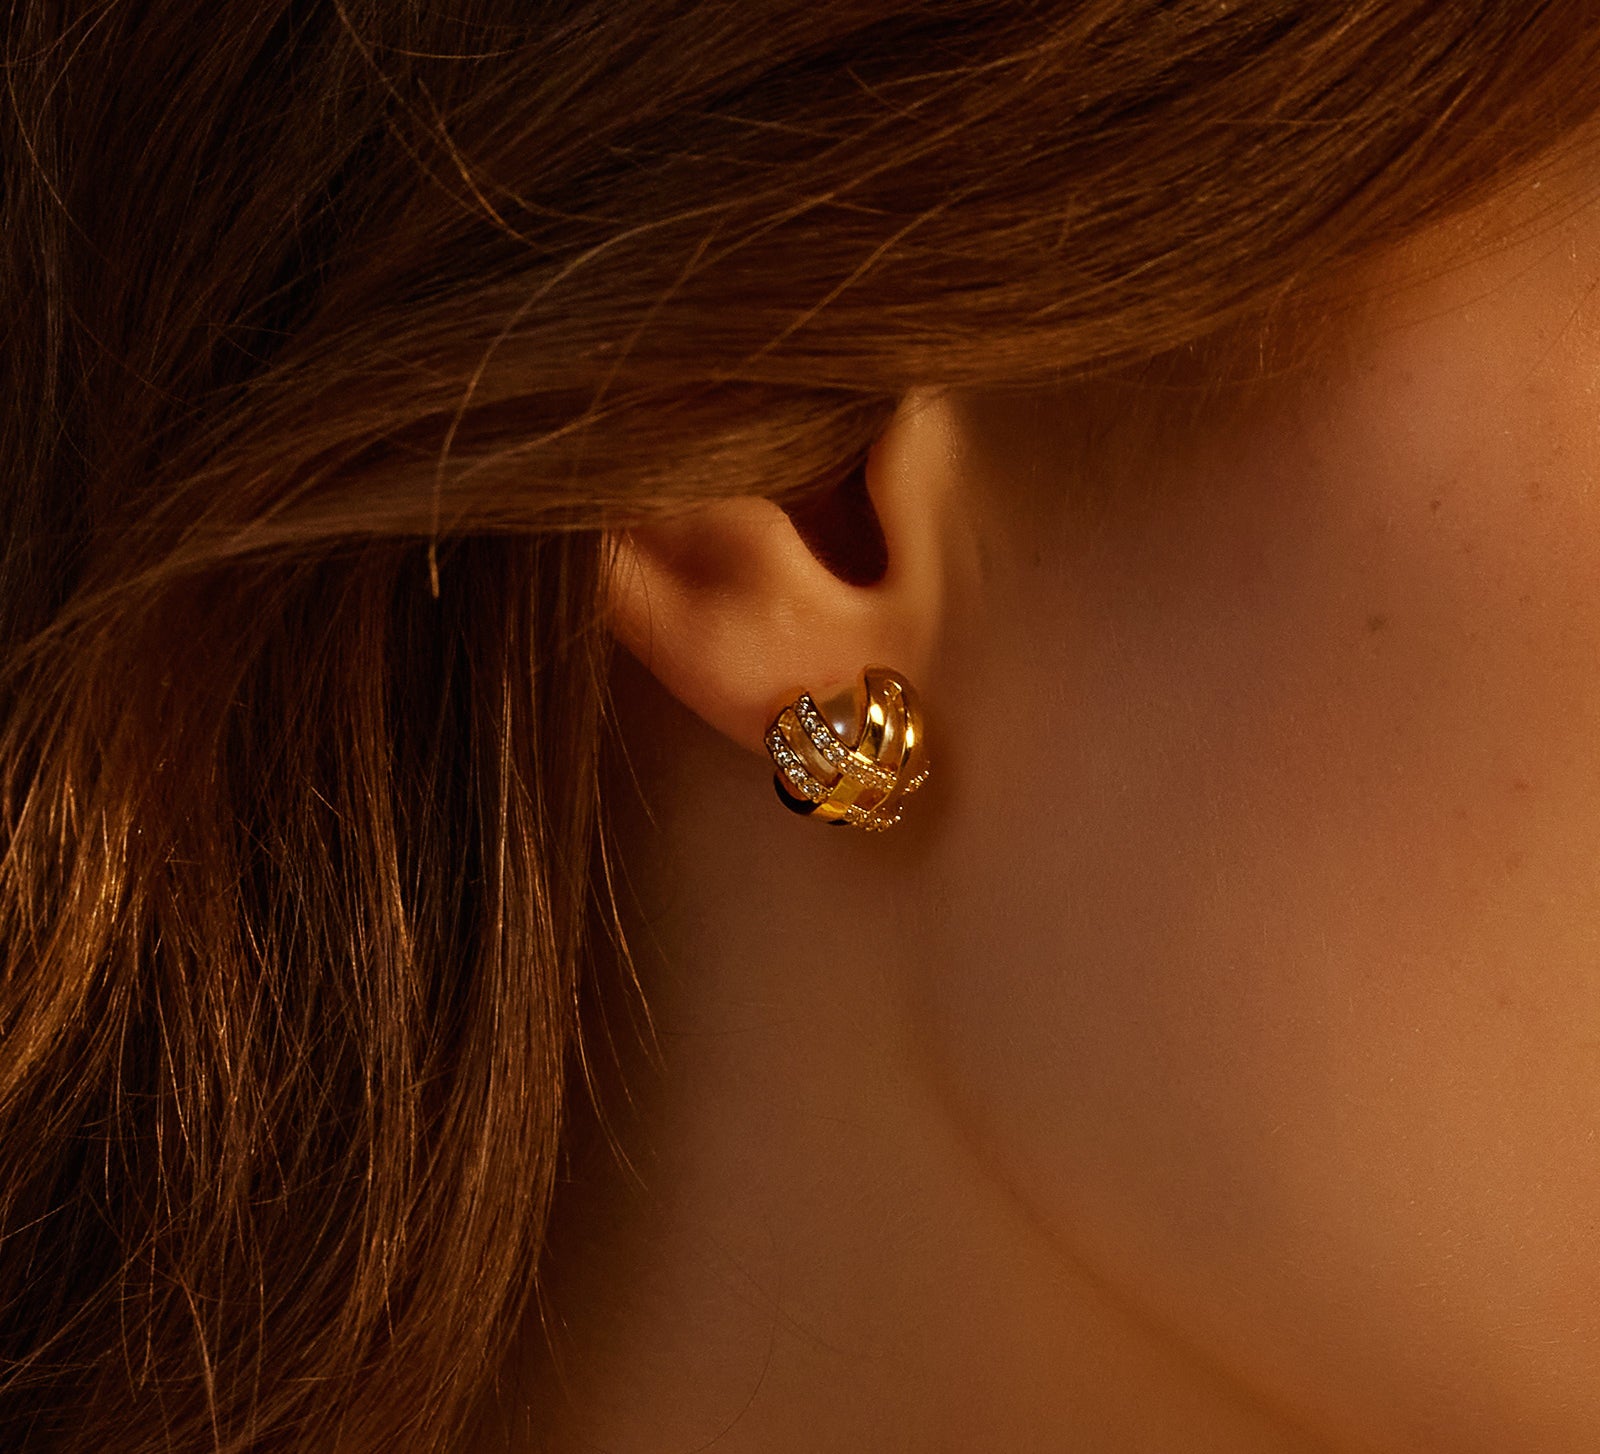 Intricately designed Coiled Stud Earrings adorned with pearls, adding a touch of modern charm to your ears